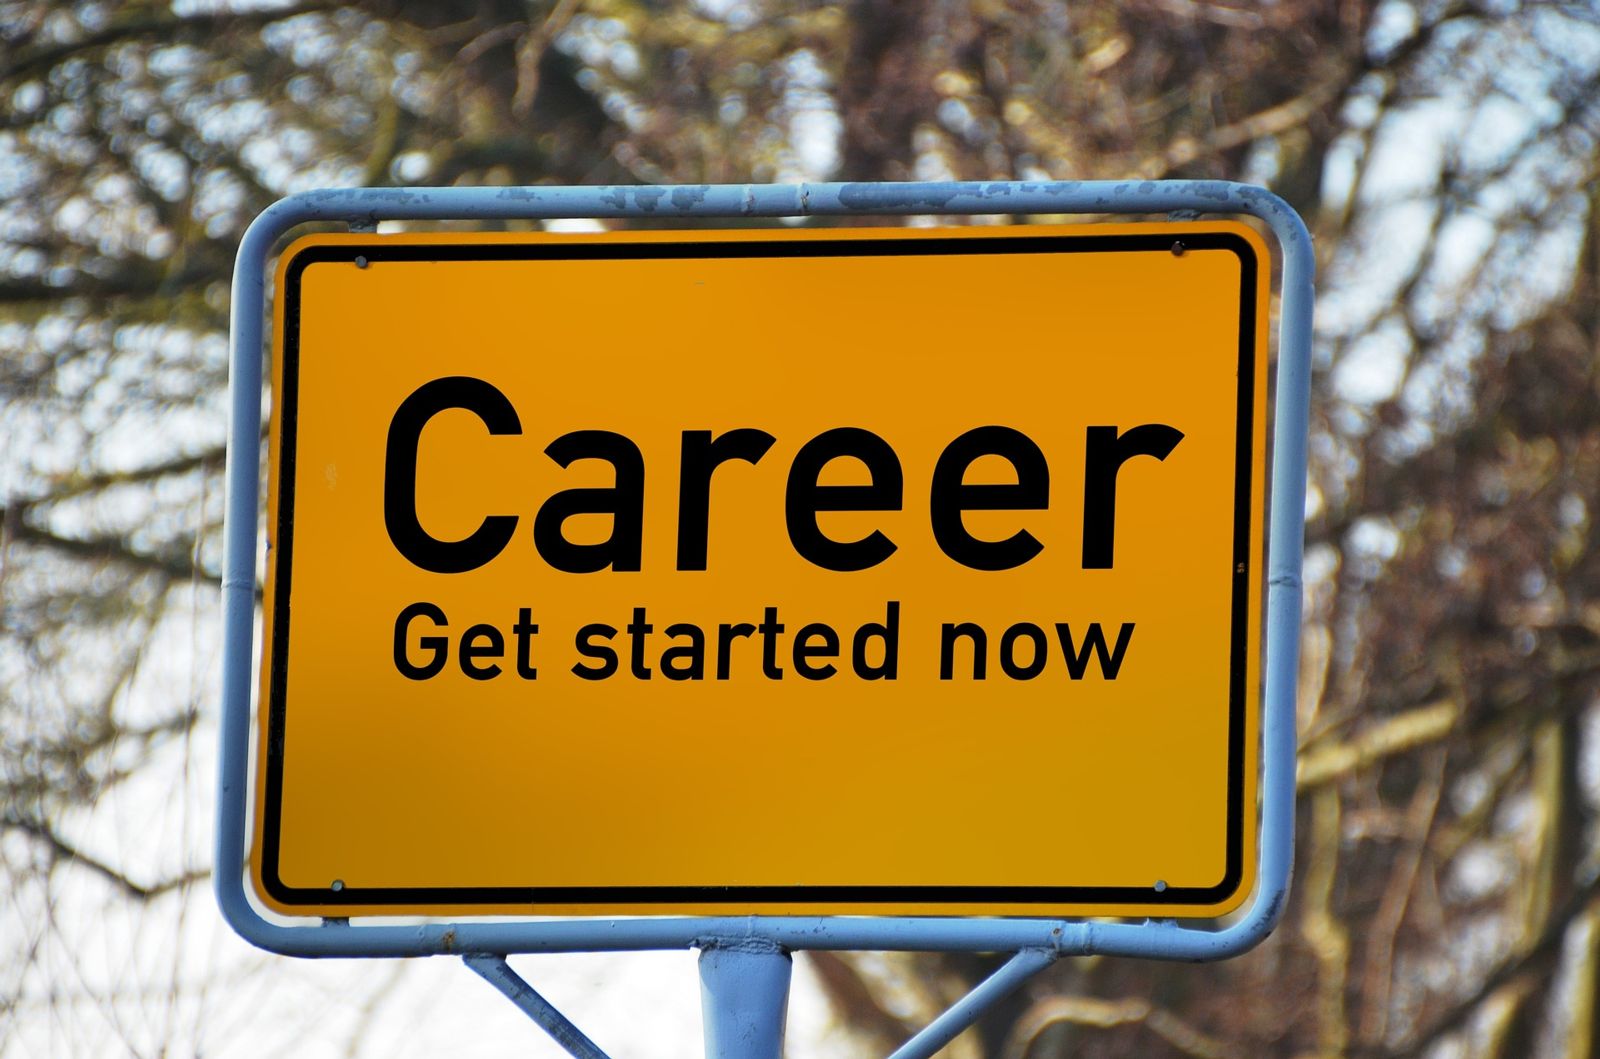 A yellow sign with the words Career Get started now in black font is displayed on a blue metal frame and pole in front of leafless trees.